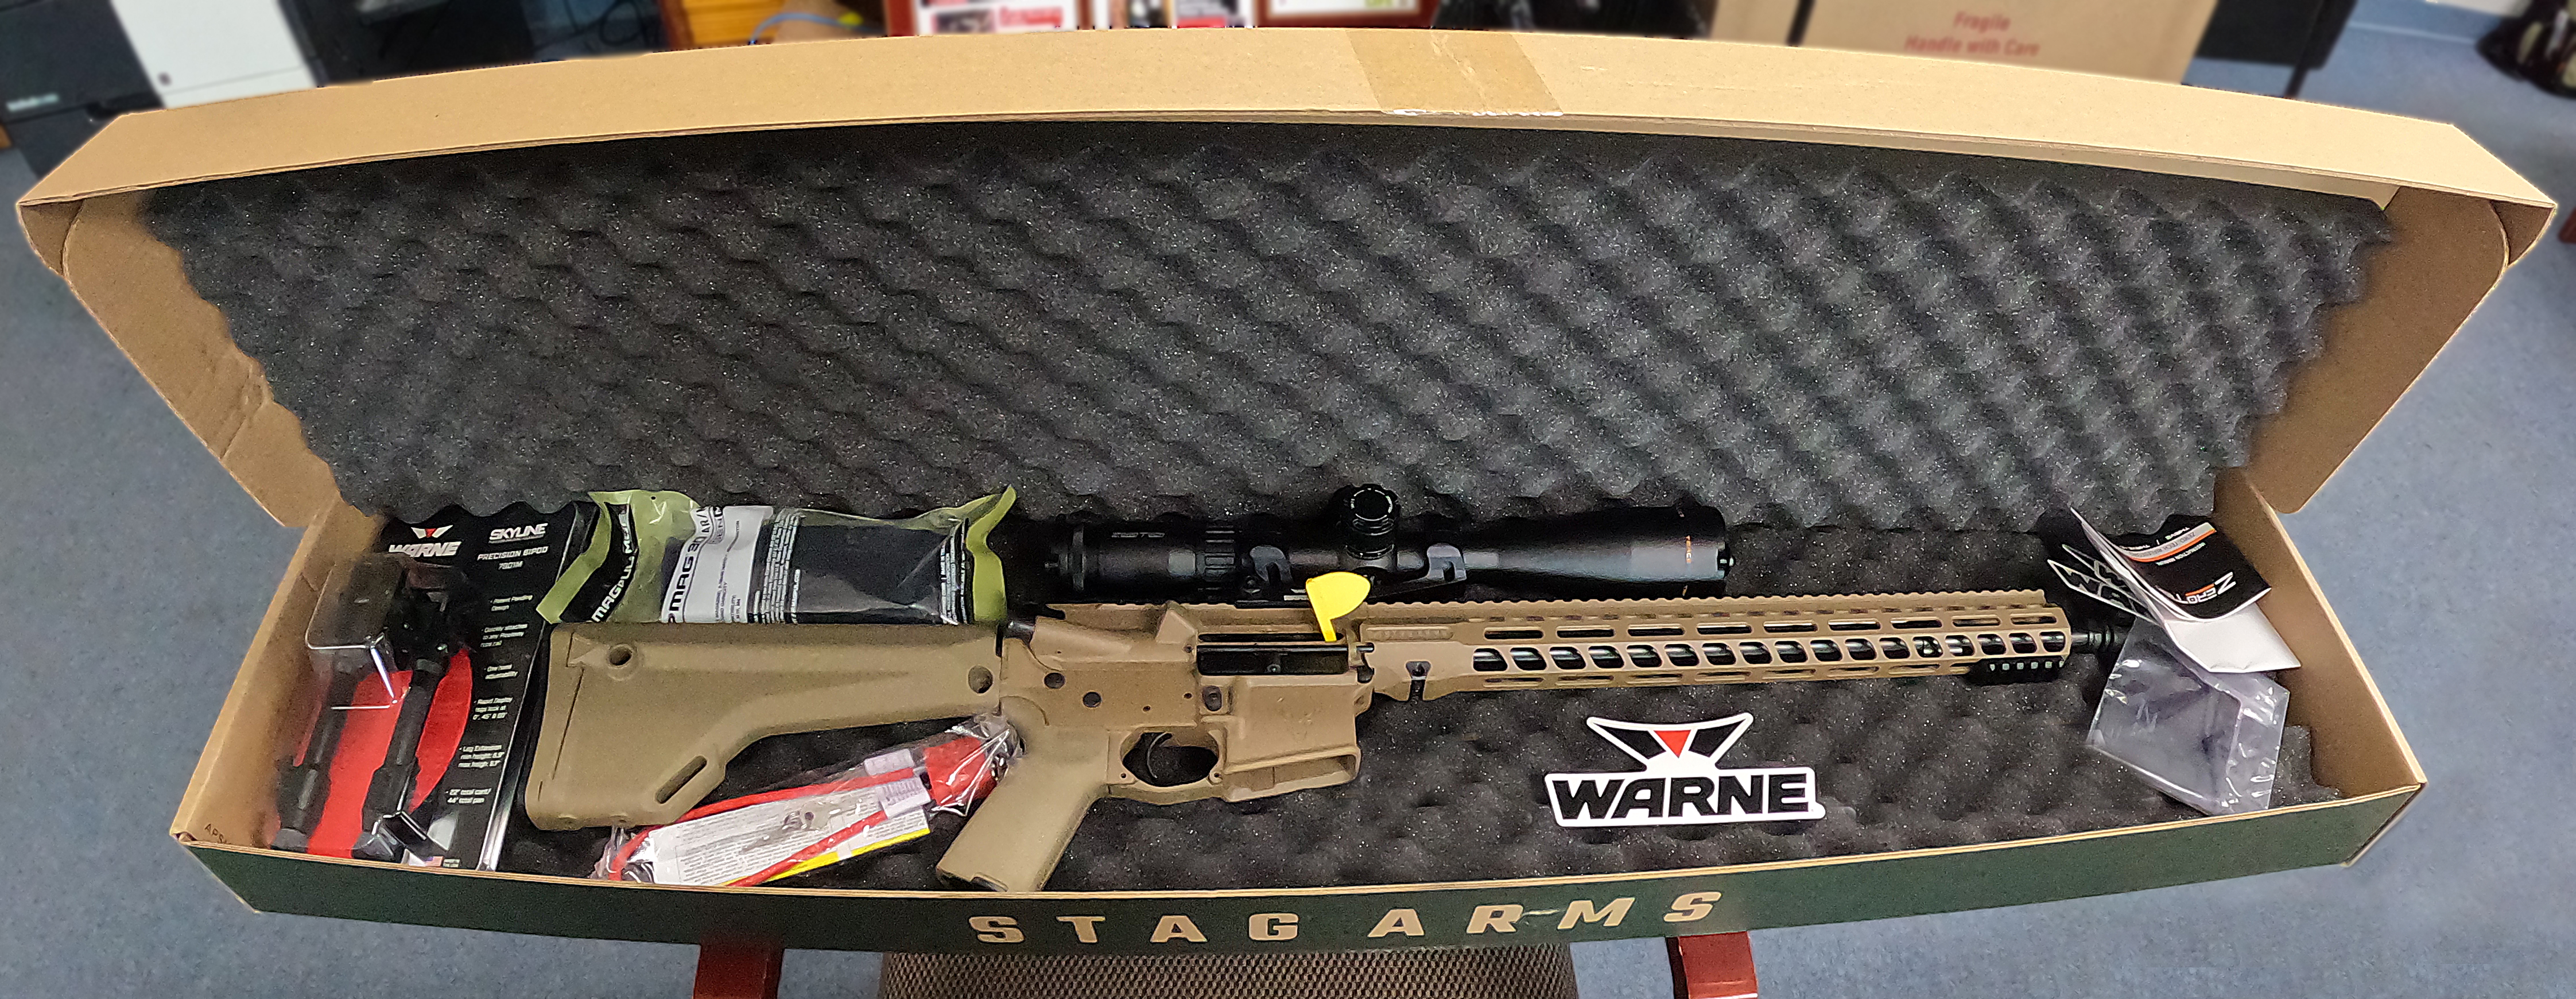 Stag-15 AR15 with Warne Scope Mount